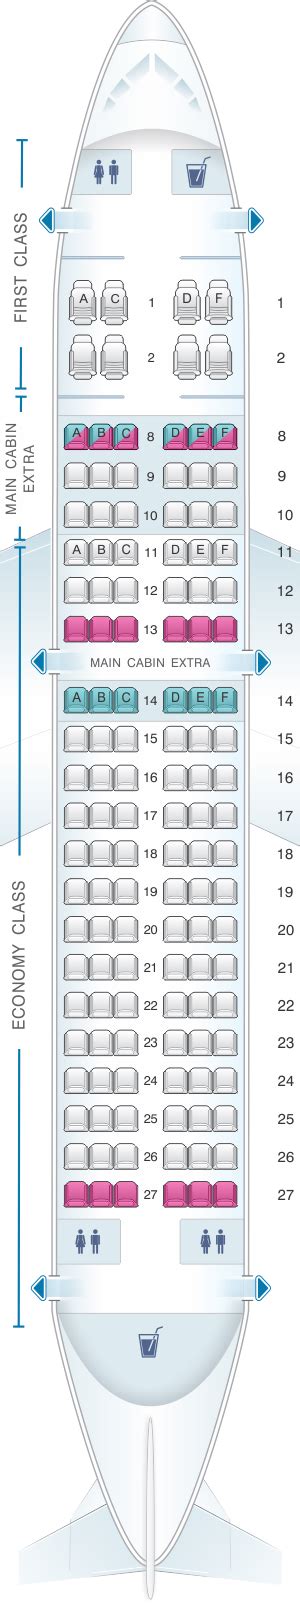 12 Airbus Seating Chart For American Airlines Pictures Airbus Way